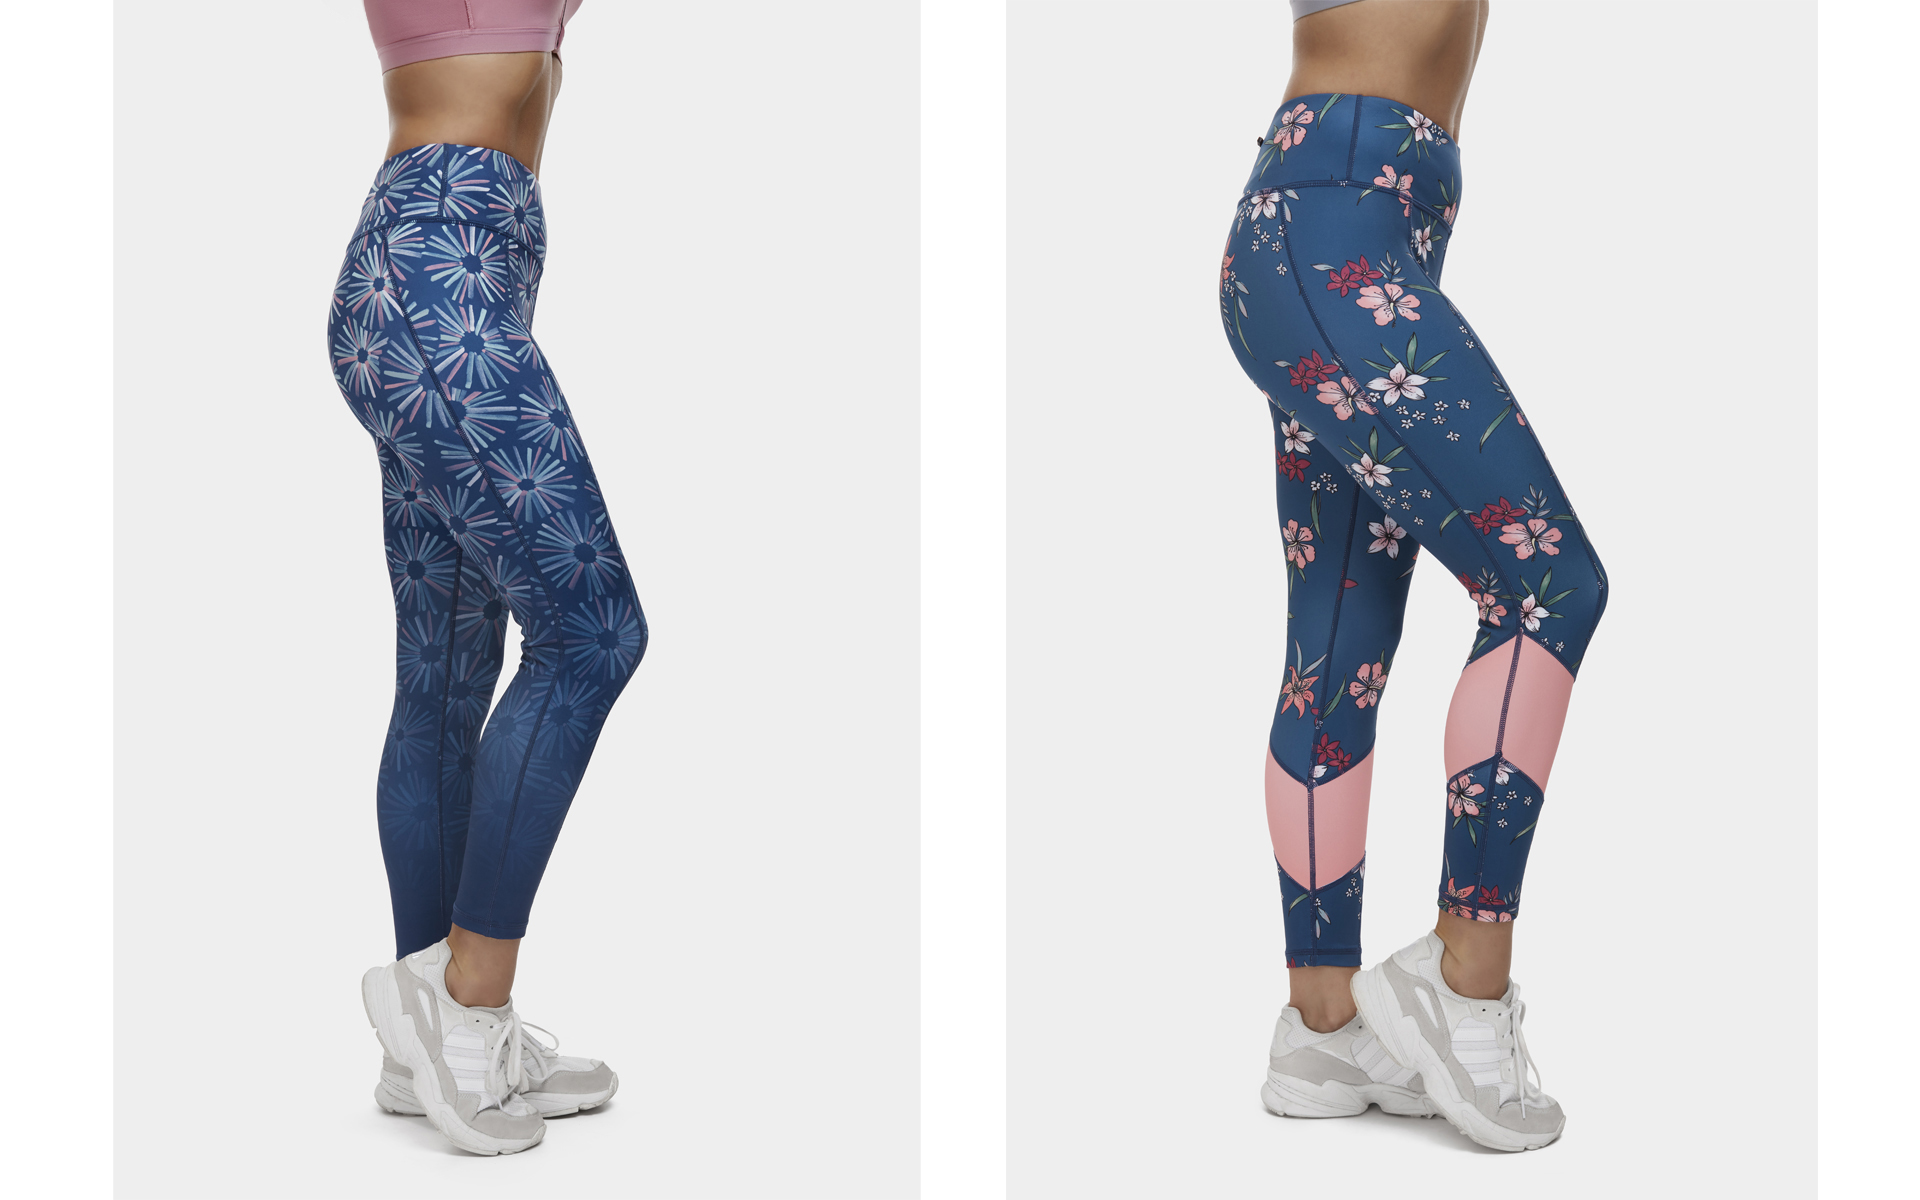 Person wearing sports leggings waist down on white backdrop for e-commerce photo shoot 